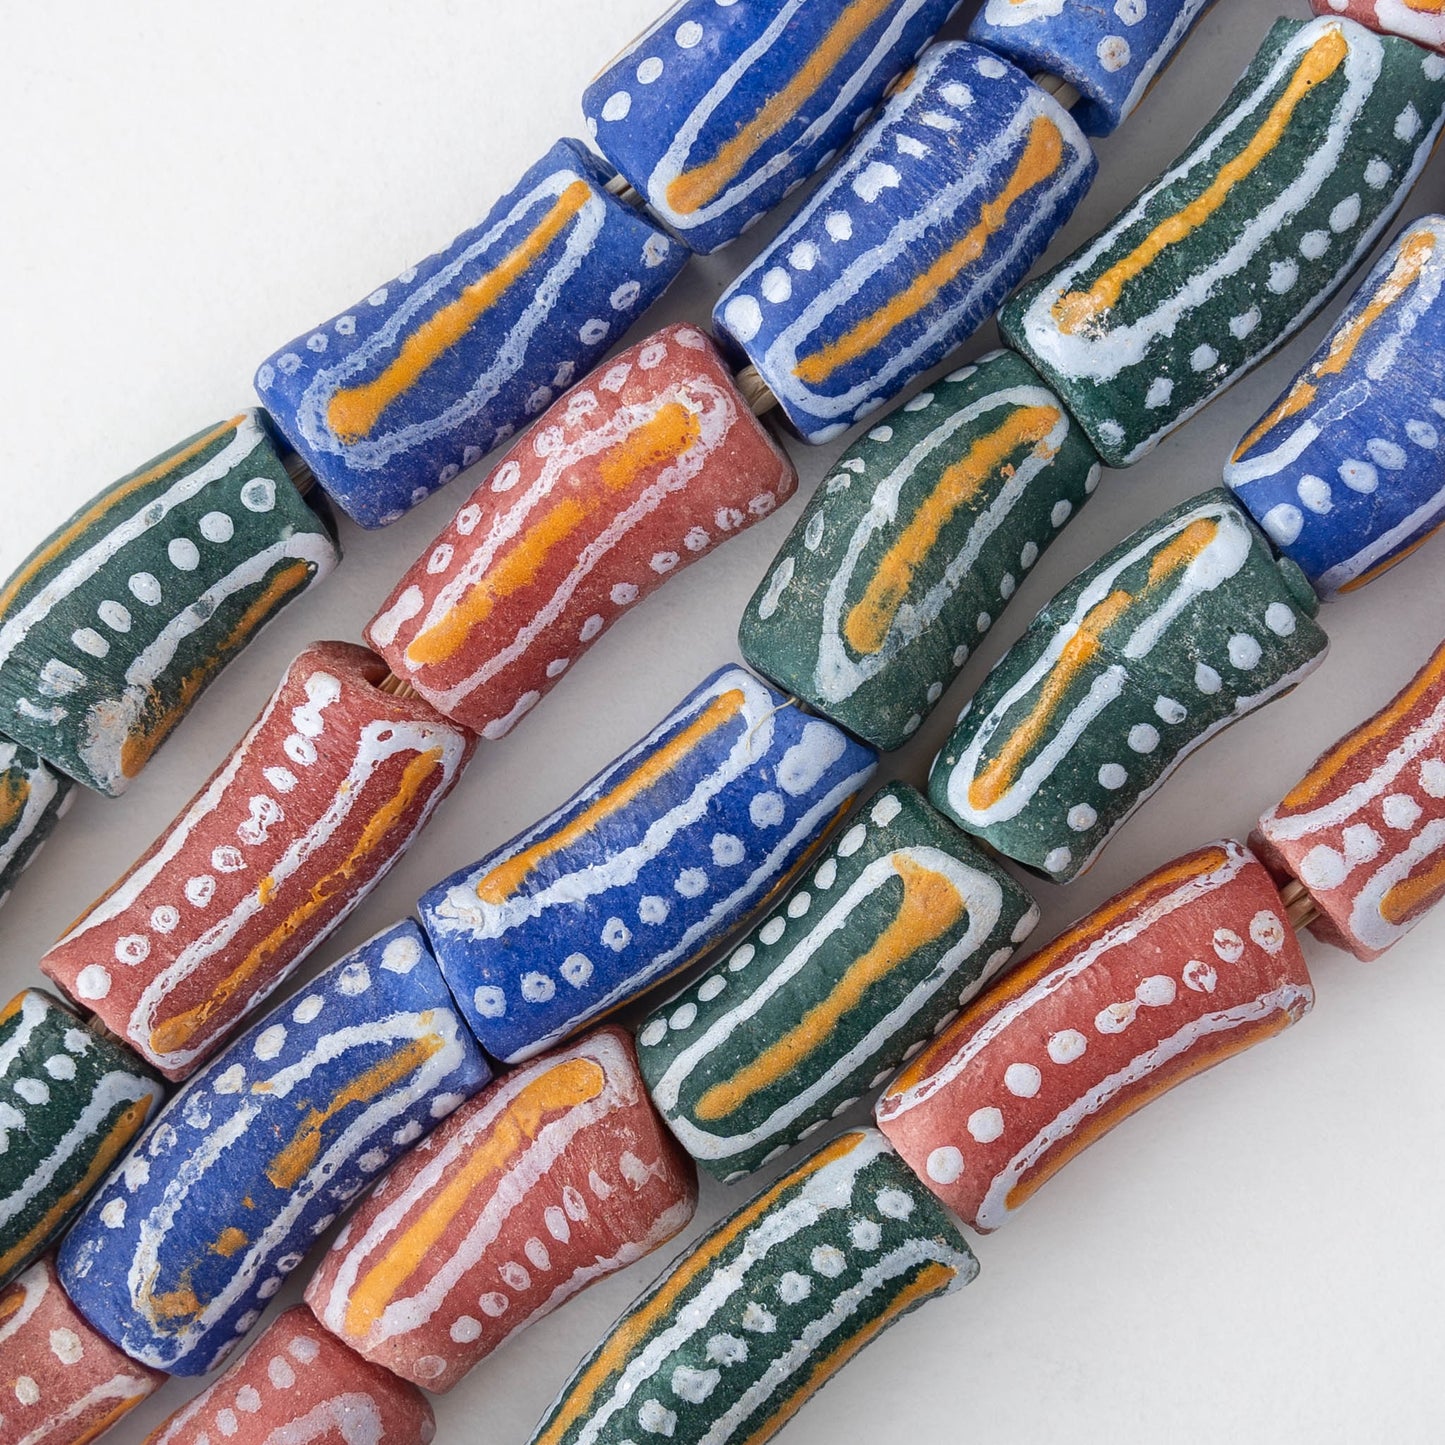 Painted Tube Beads From Ghana Africa - Designed - 12 Beads